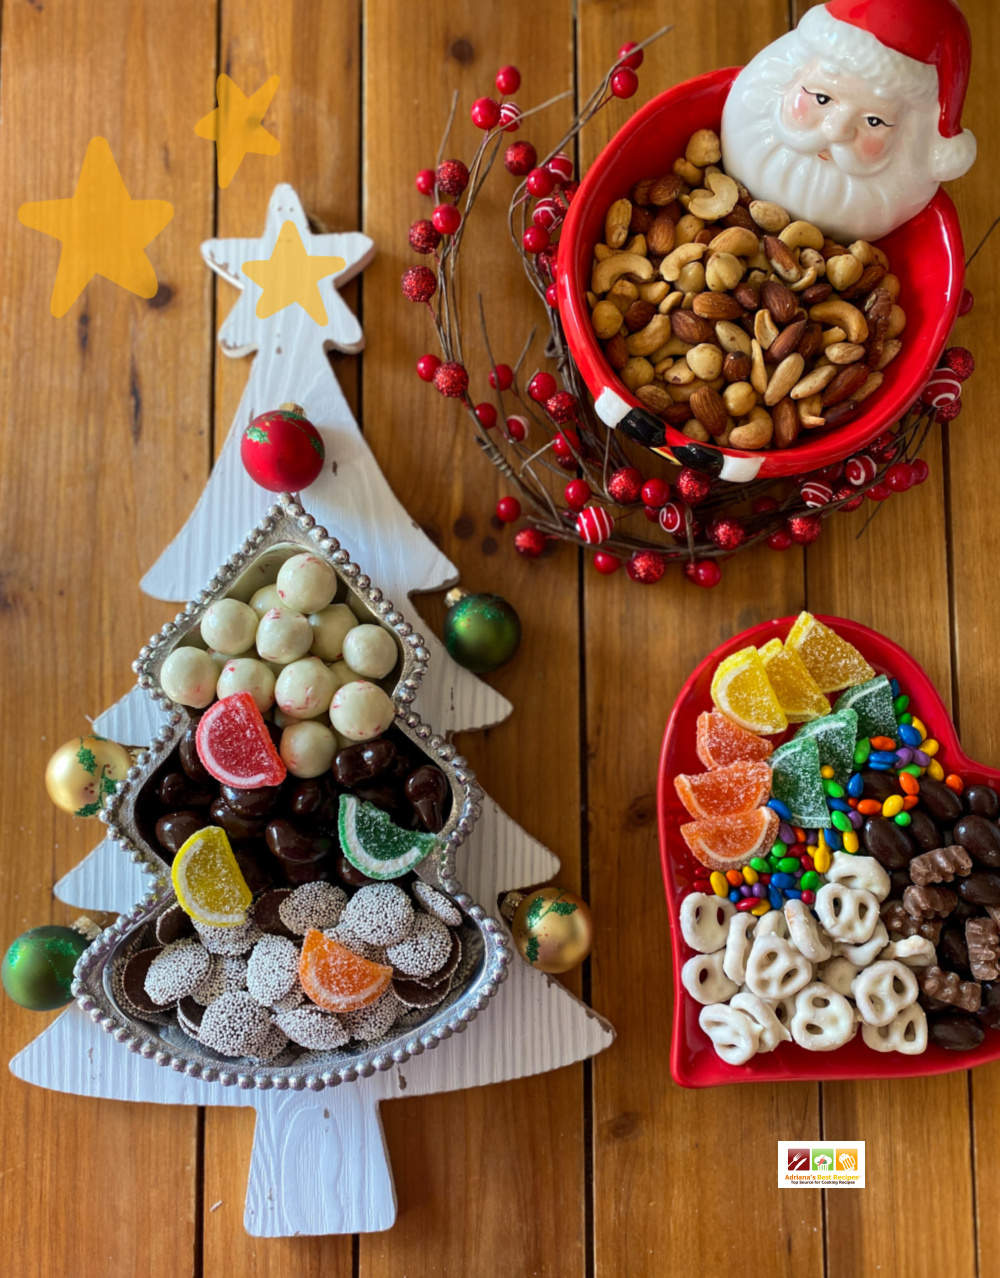 Christmas themed candy board with nuts, chocolate, and gummies